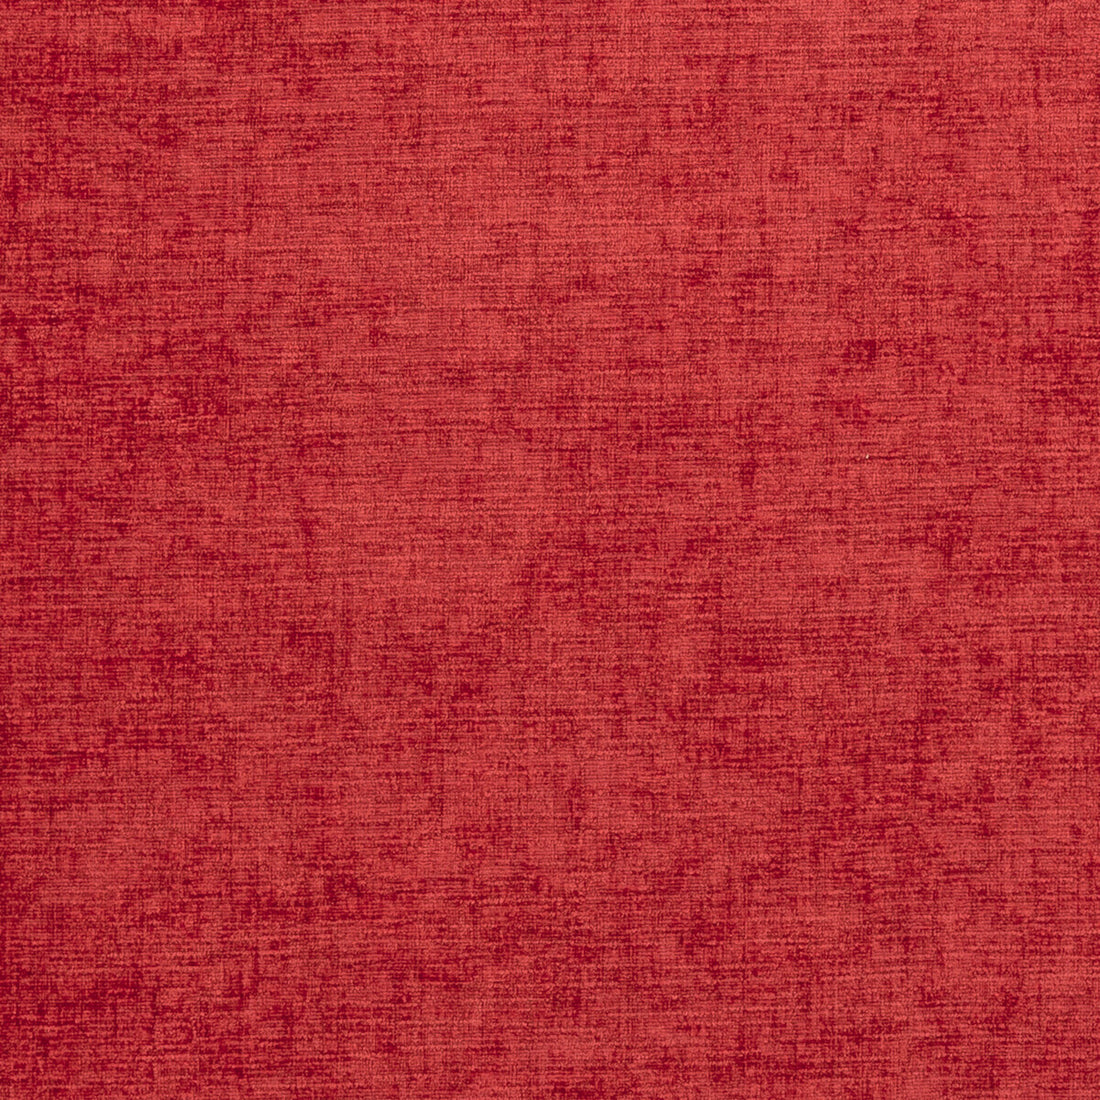 Karina fabric in garnet color - pattern F0371/16.CAC.0 - by Clarke And Clarke in the Clarke &amp; Clarke Karina collection